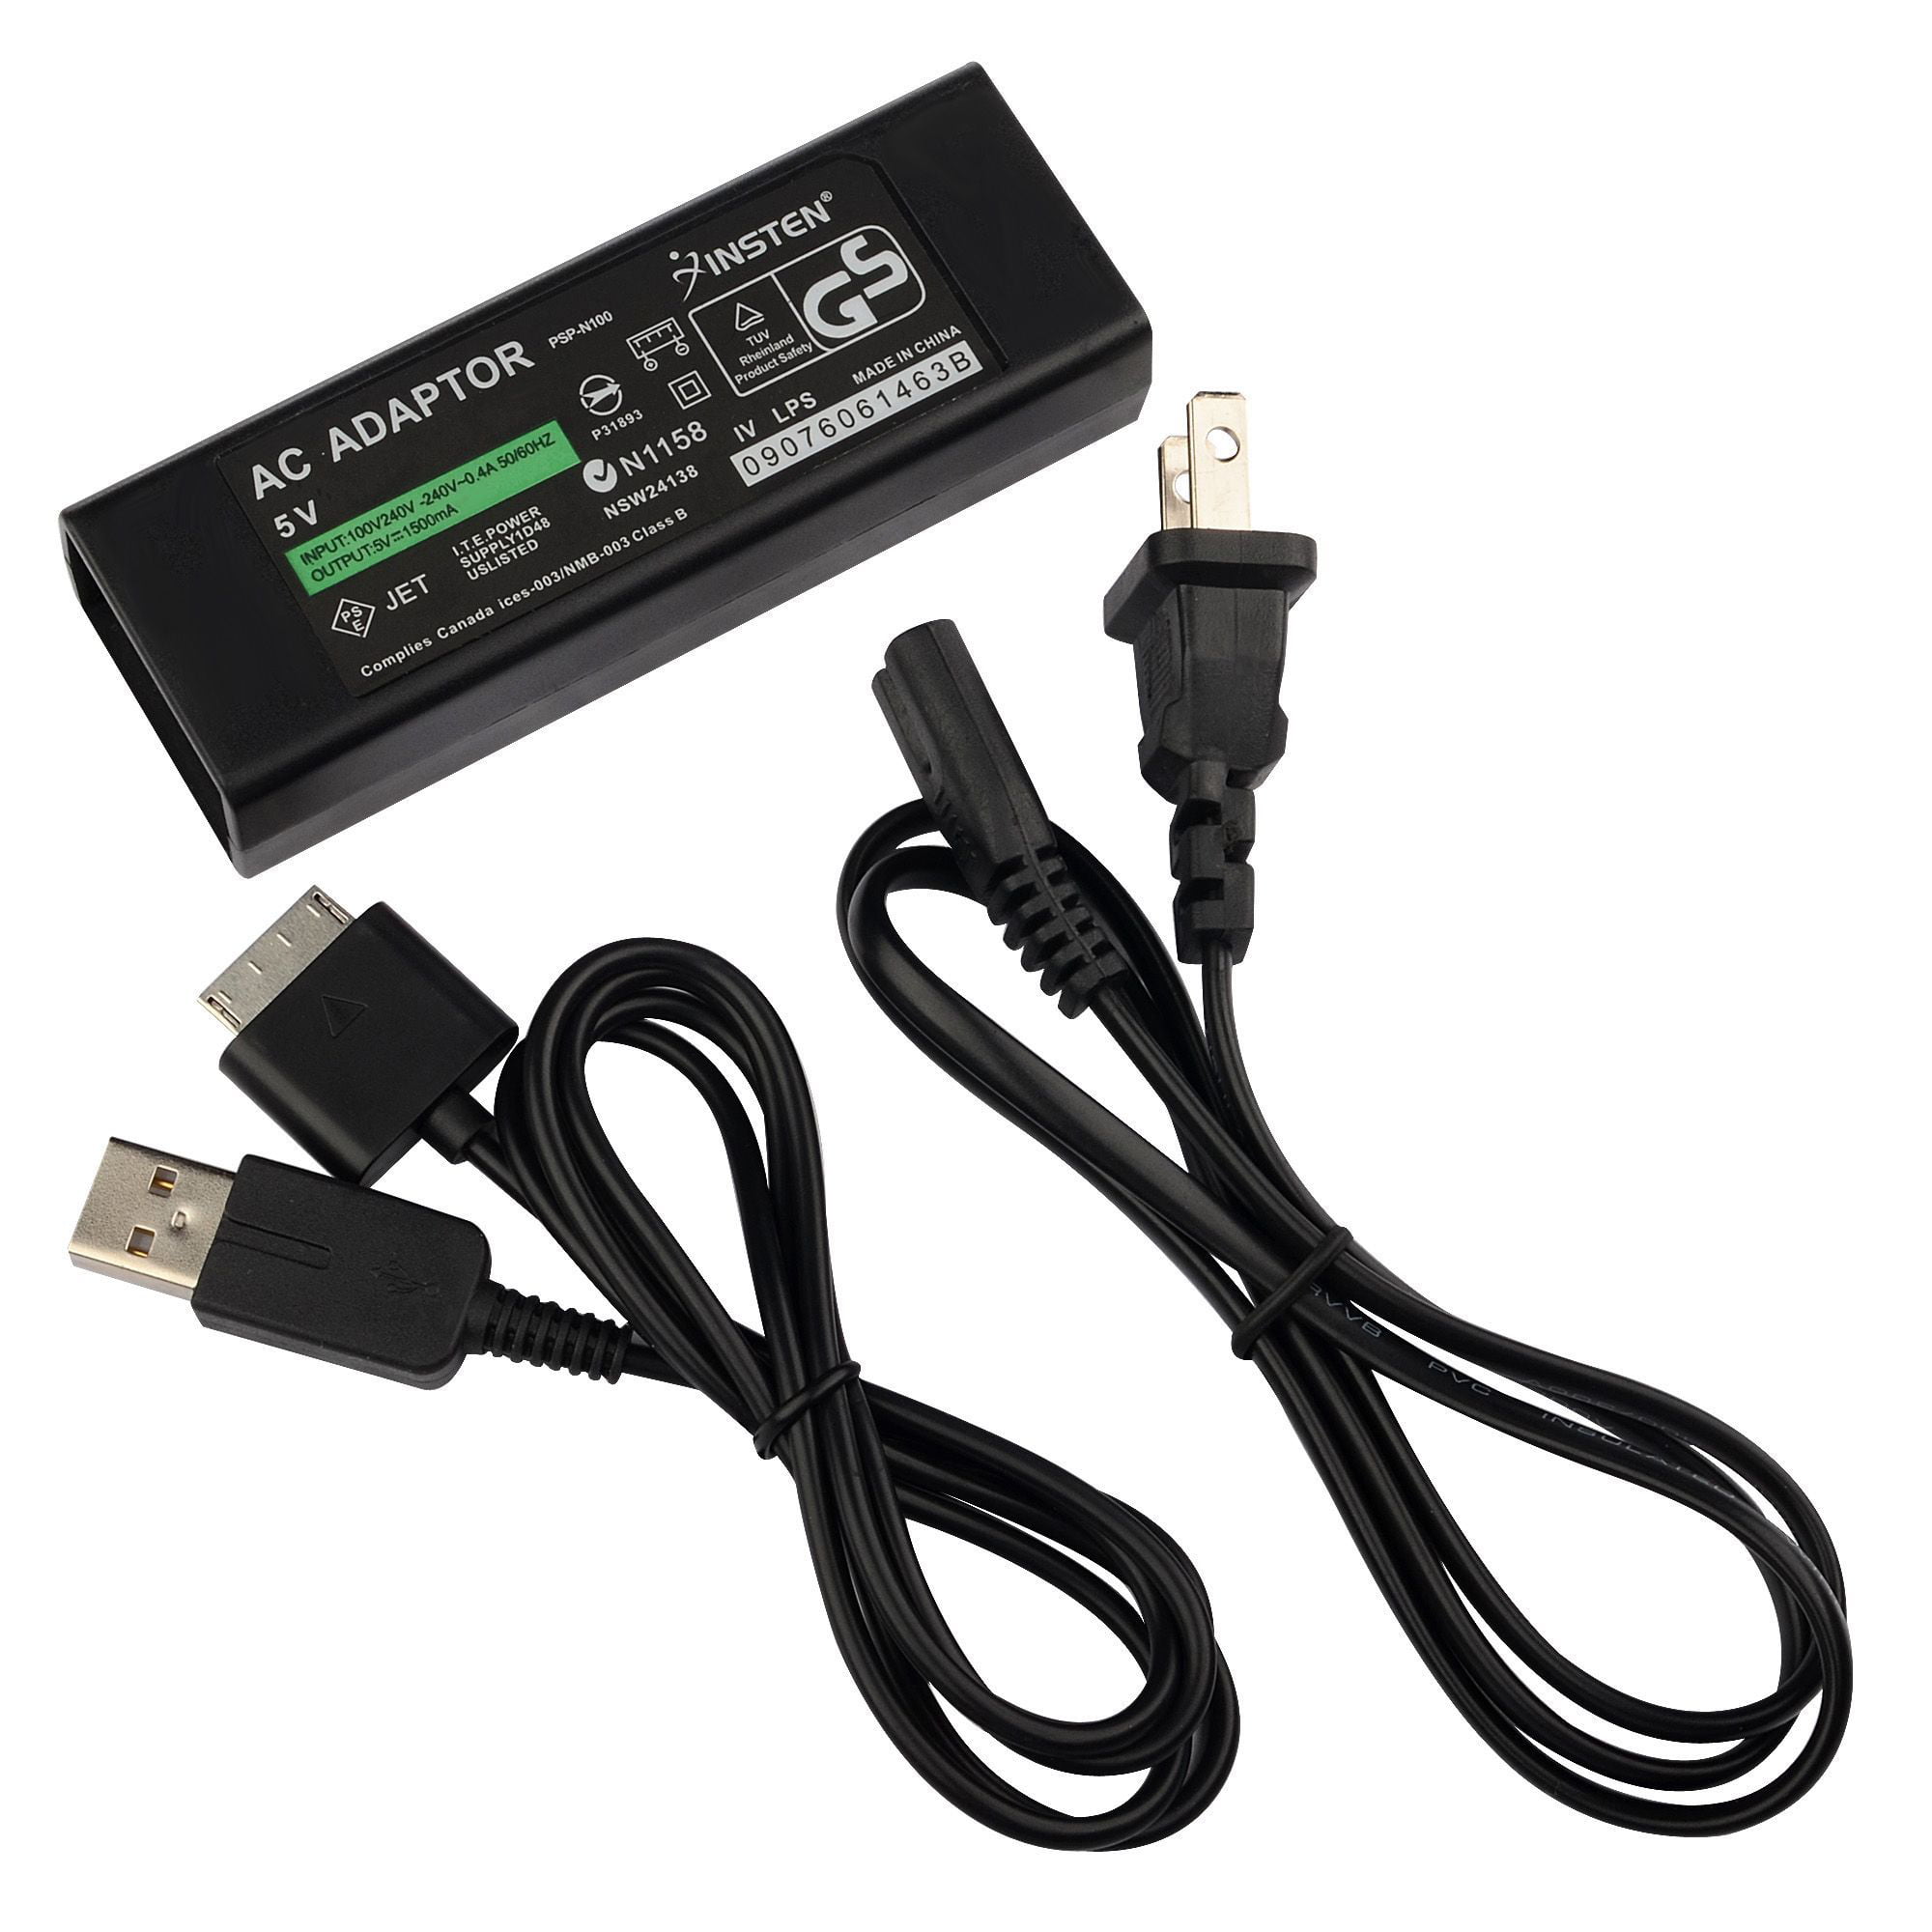 For Psp Go Charger Travel Wall Ac Adapter With 2 In 1 Usb Data Sync